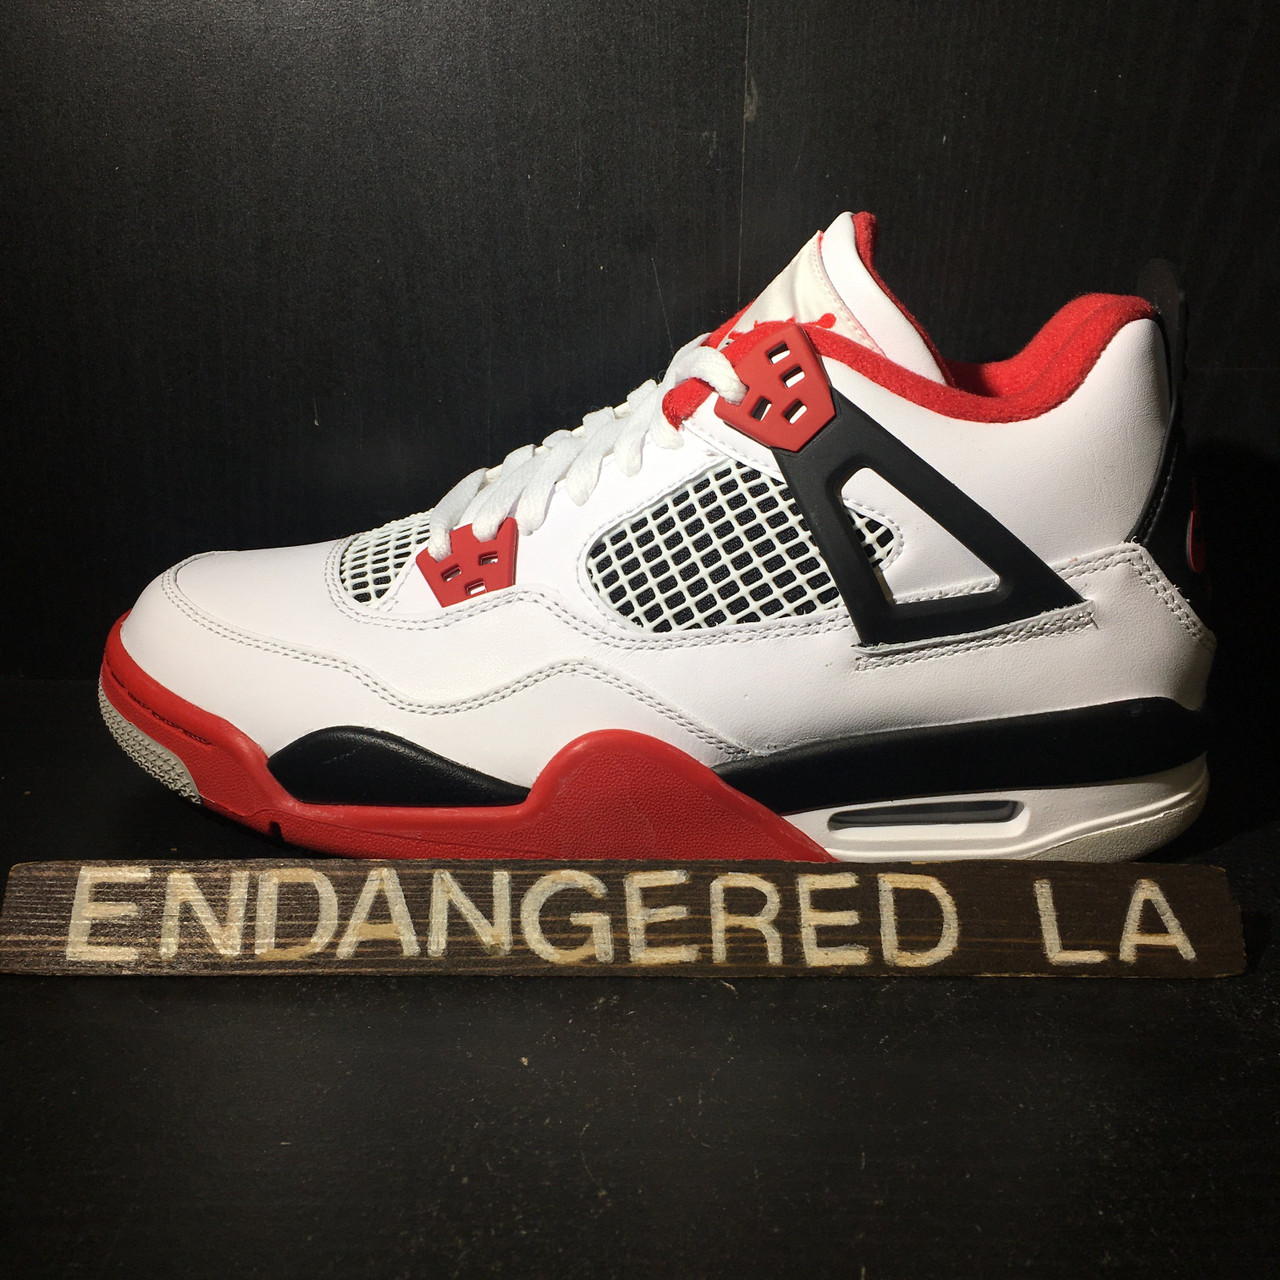 Air Jordan 4 Red Fire (1:1 Rep, TOP QUALITY, REAL LEATHER ) from Suplook，  Contact Whatsapp at +8618559333945 to make an order or check details.  Wholesale and retail worldwide. : r/Suplooksneaker